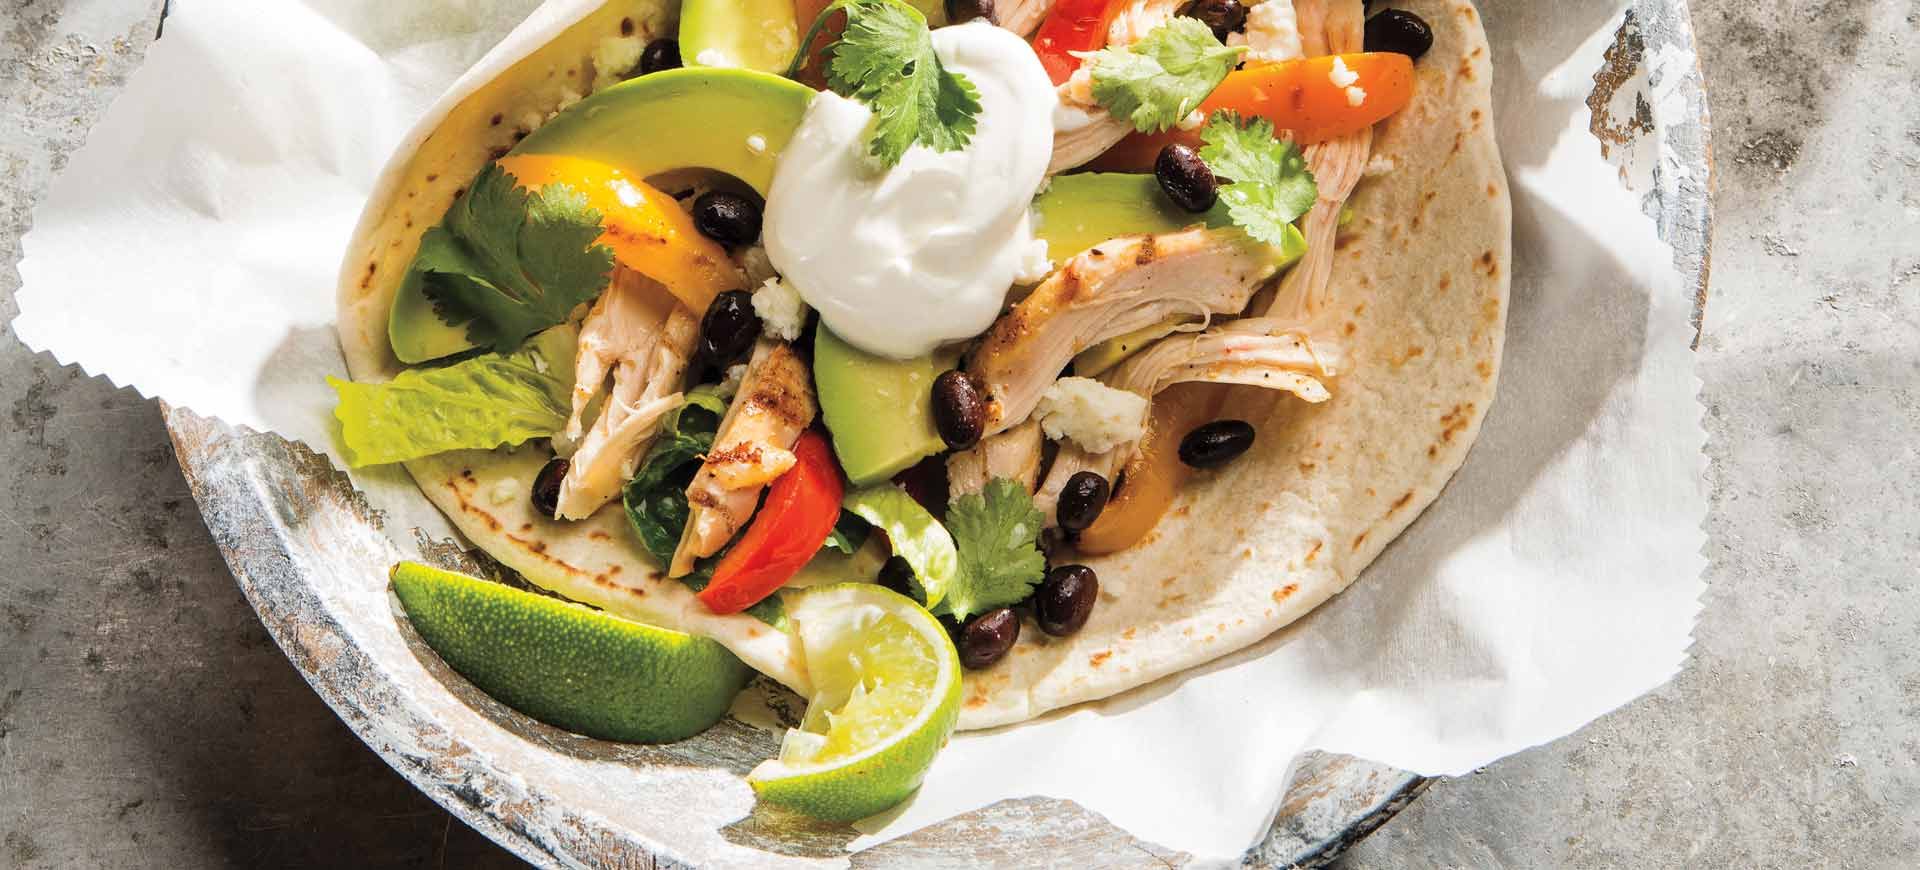 Spice-Rubbed Pulled Chicken Soft Tacos